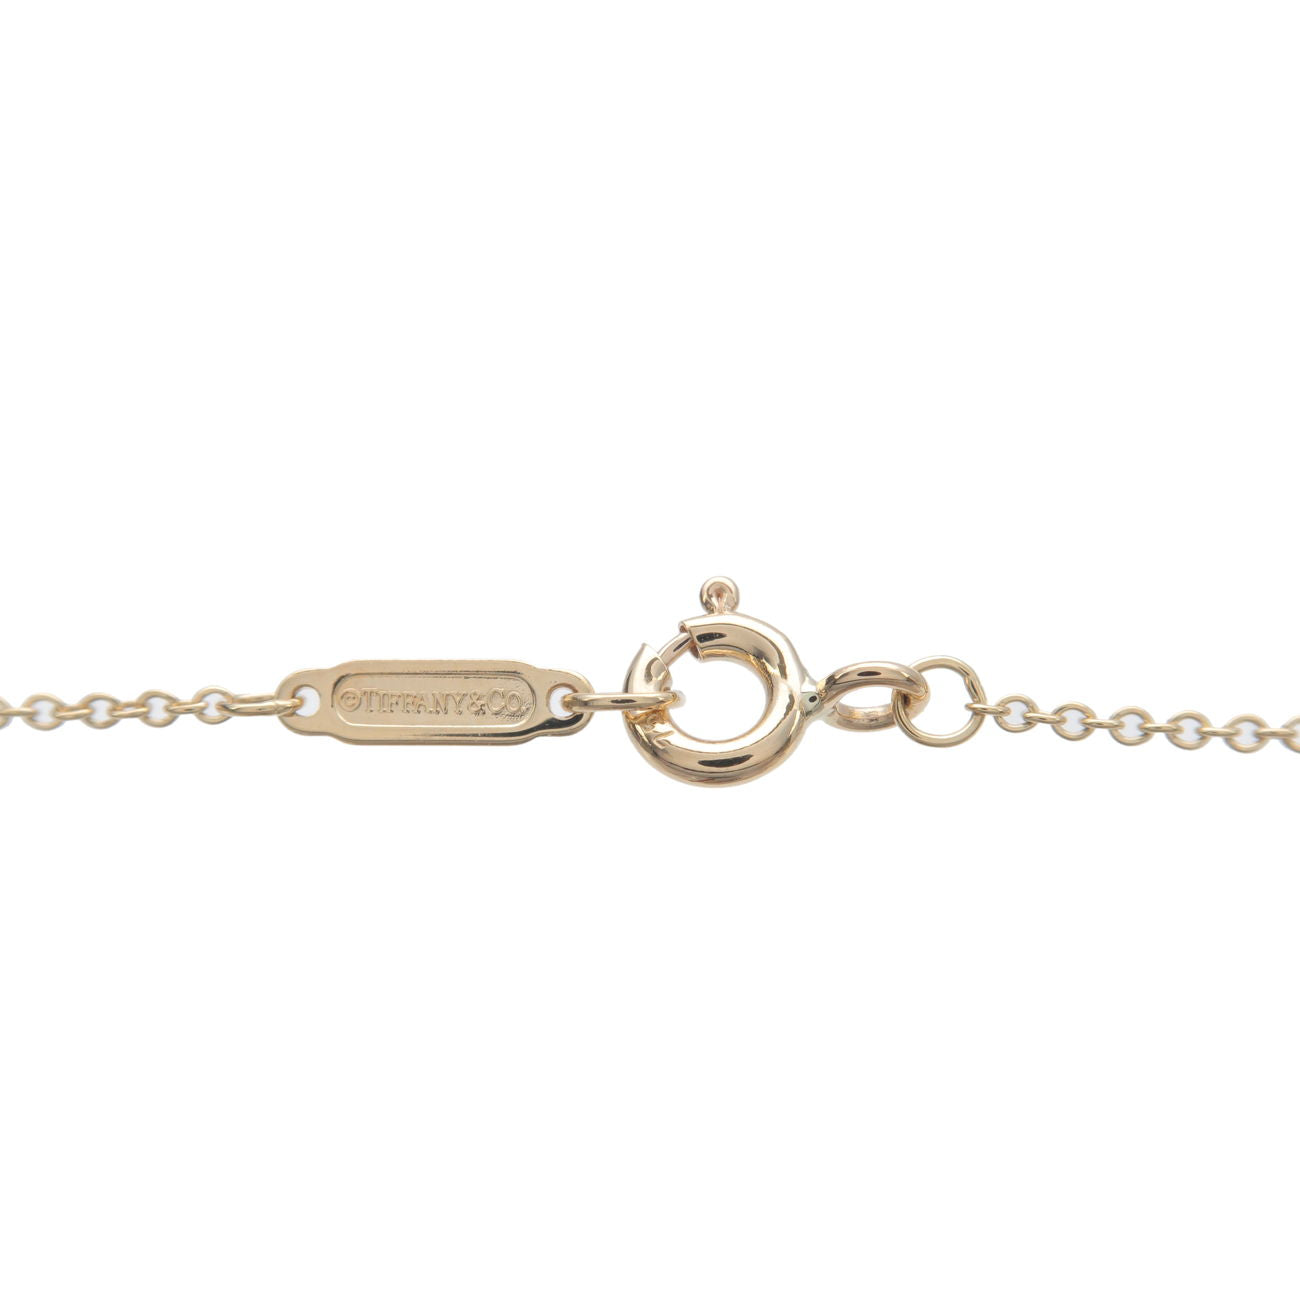 Tiffany & Co. Notes Heart Tag Necklace K18YG 750 Yellow Gold